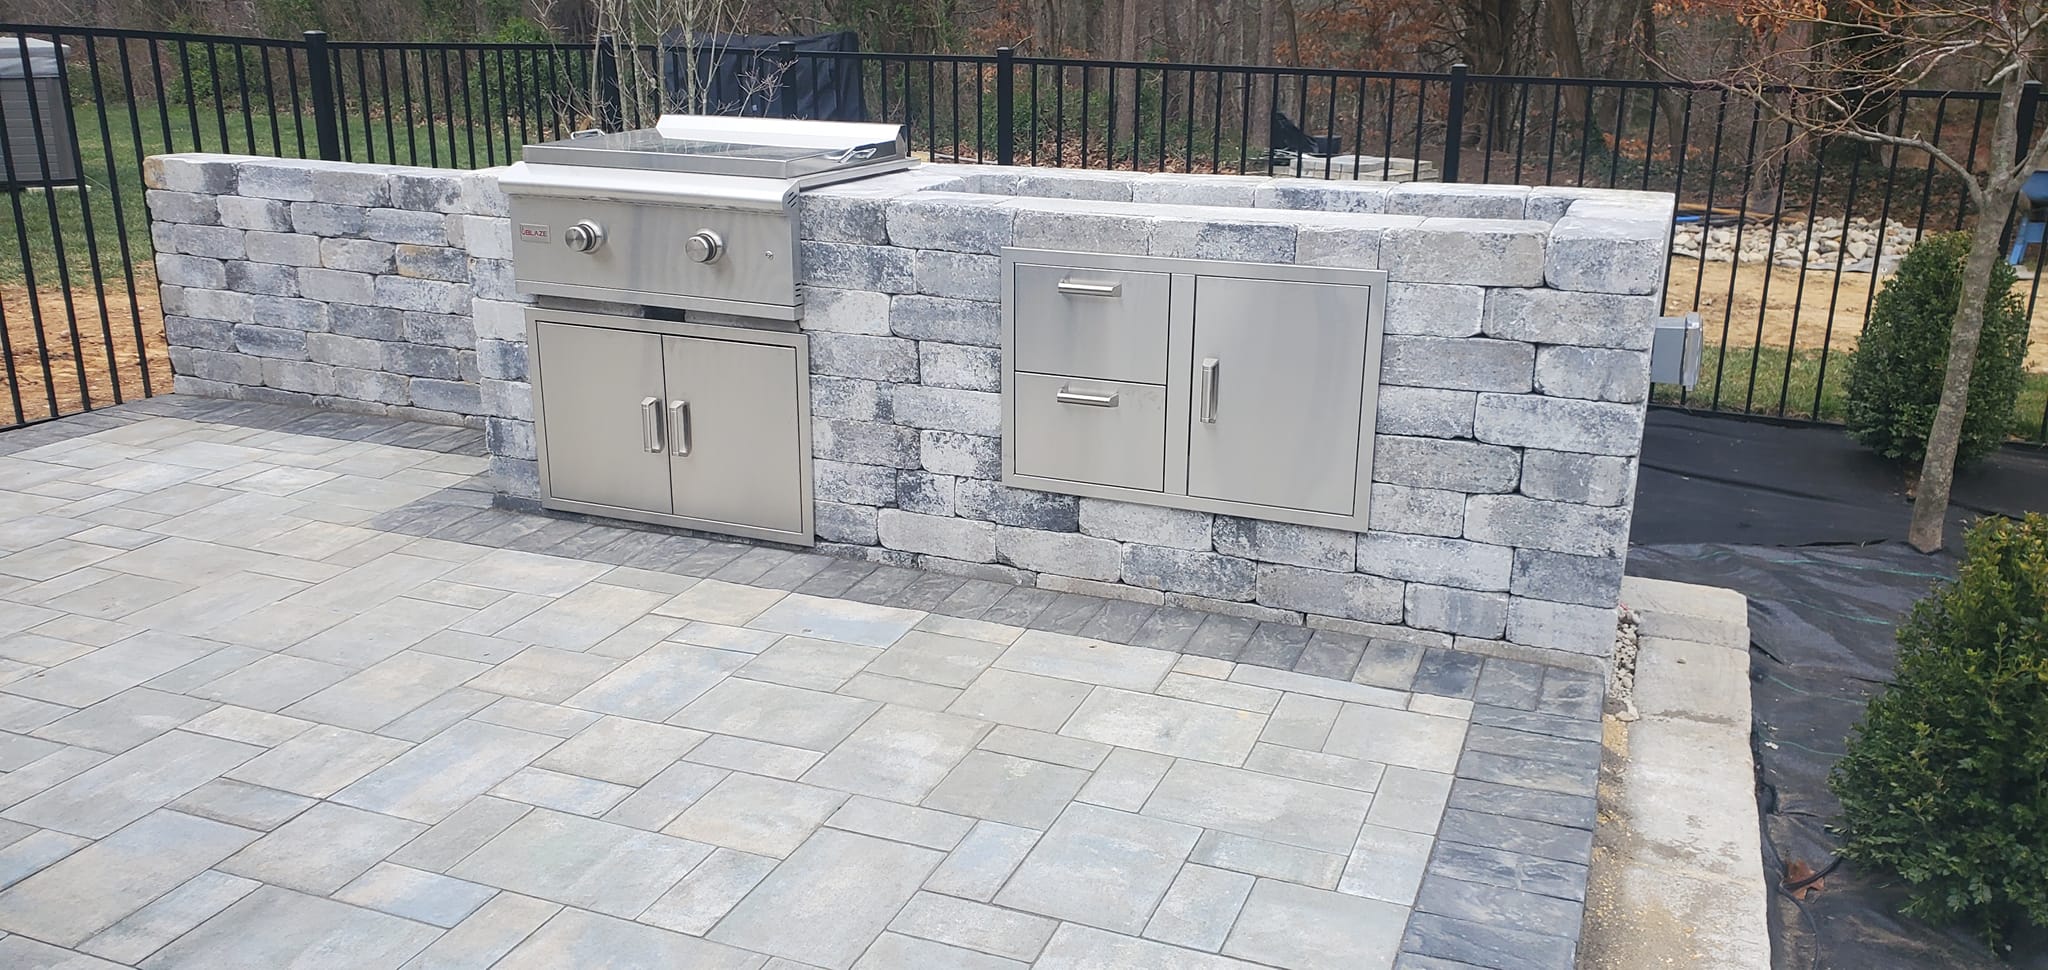 Adam's Lawn & Landscaping Huntingtown Maryland Paver Patio Kitchen